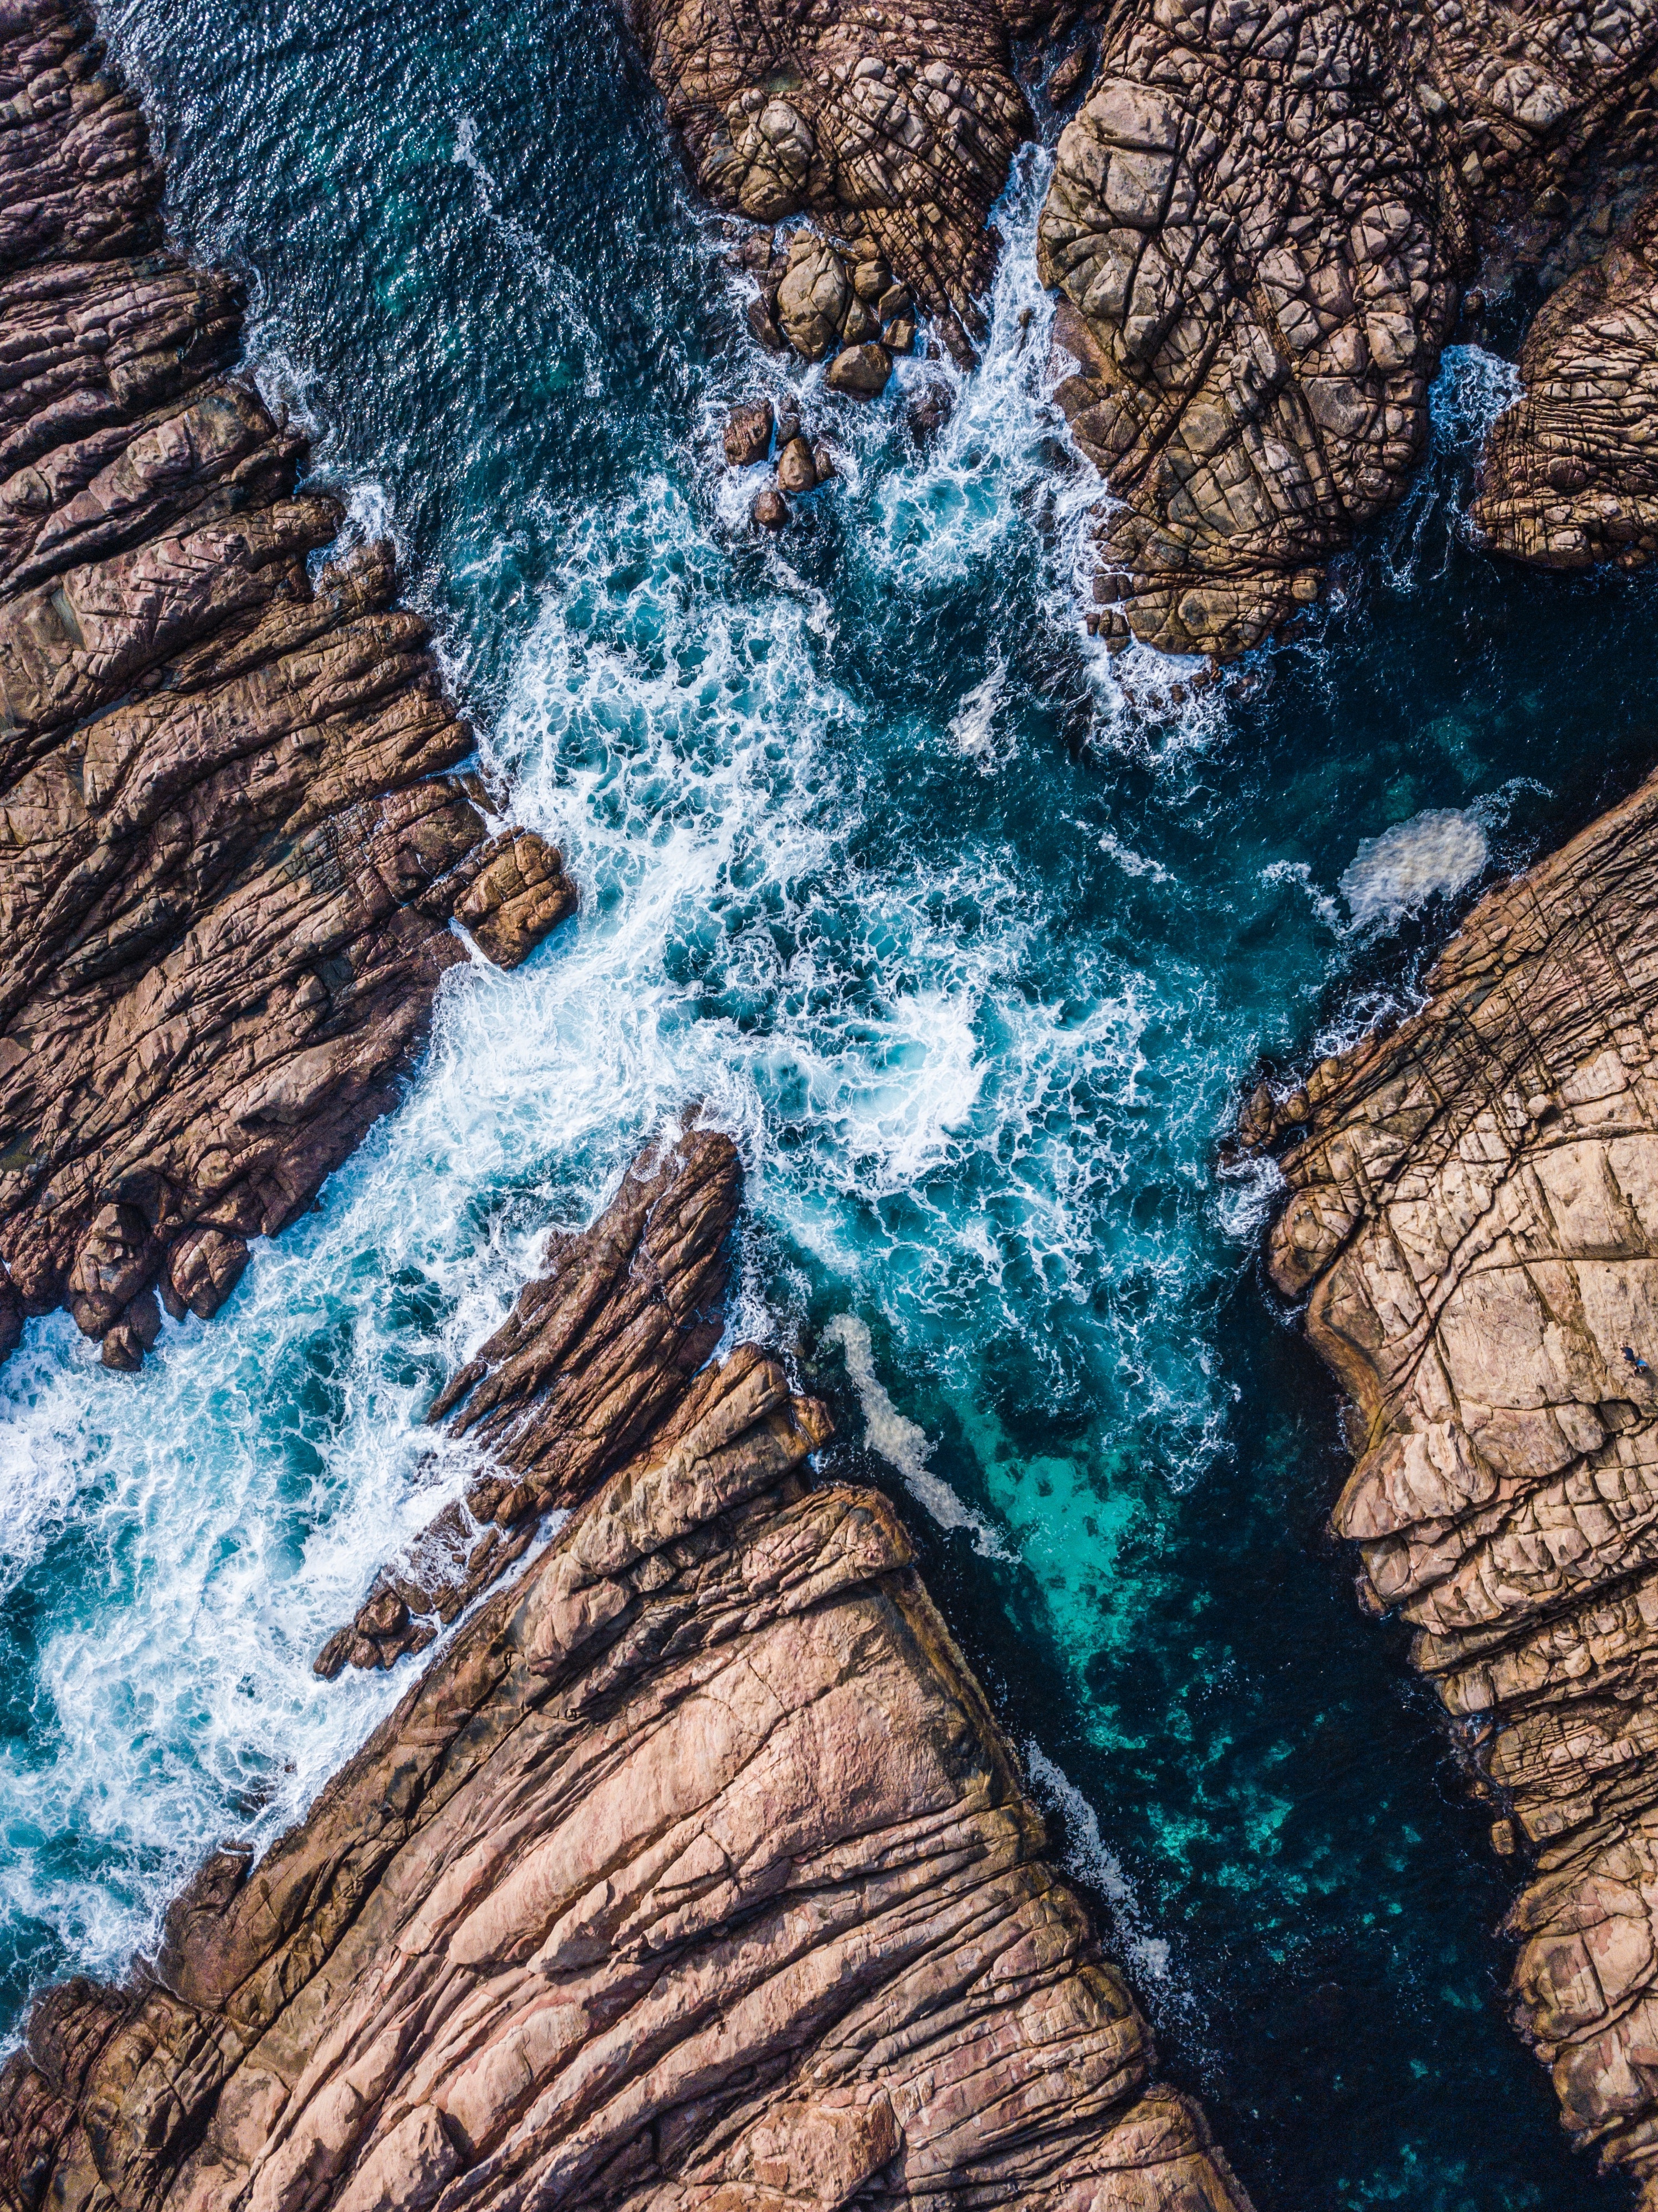 waves, view from above, splash, nature, rocks, ocean